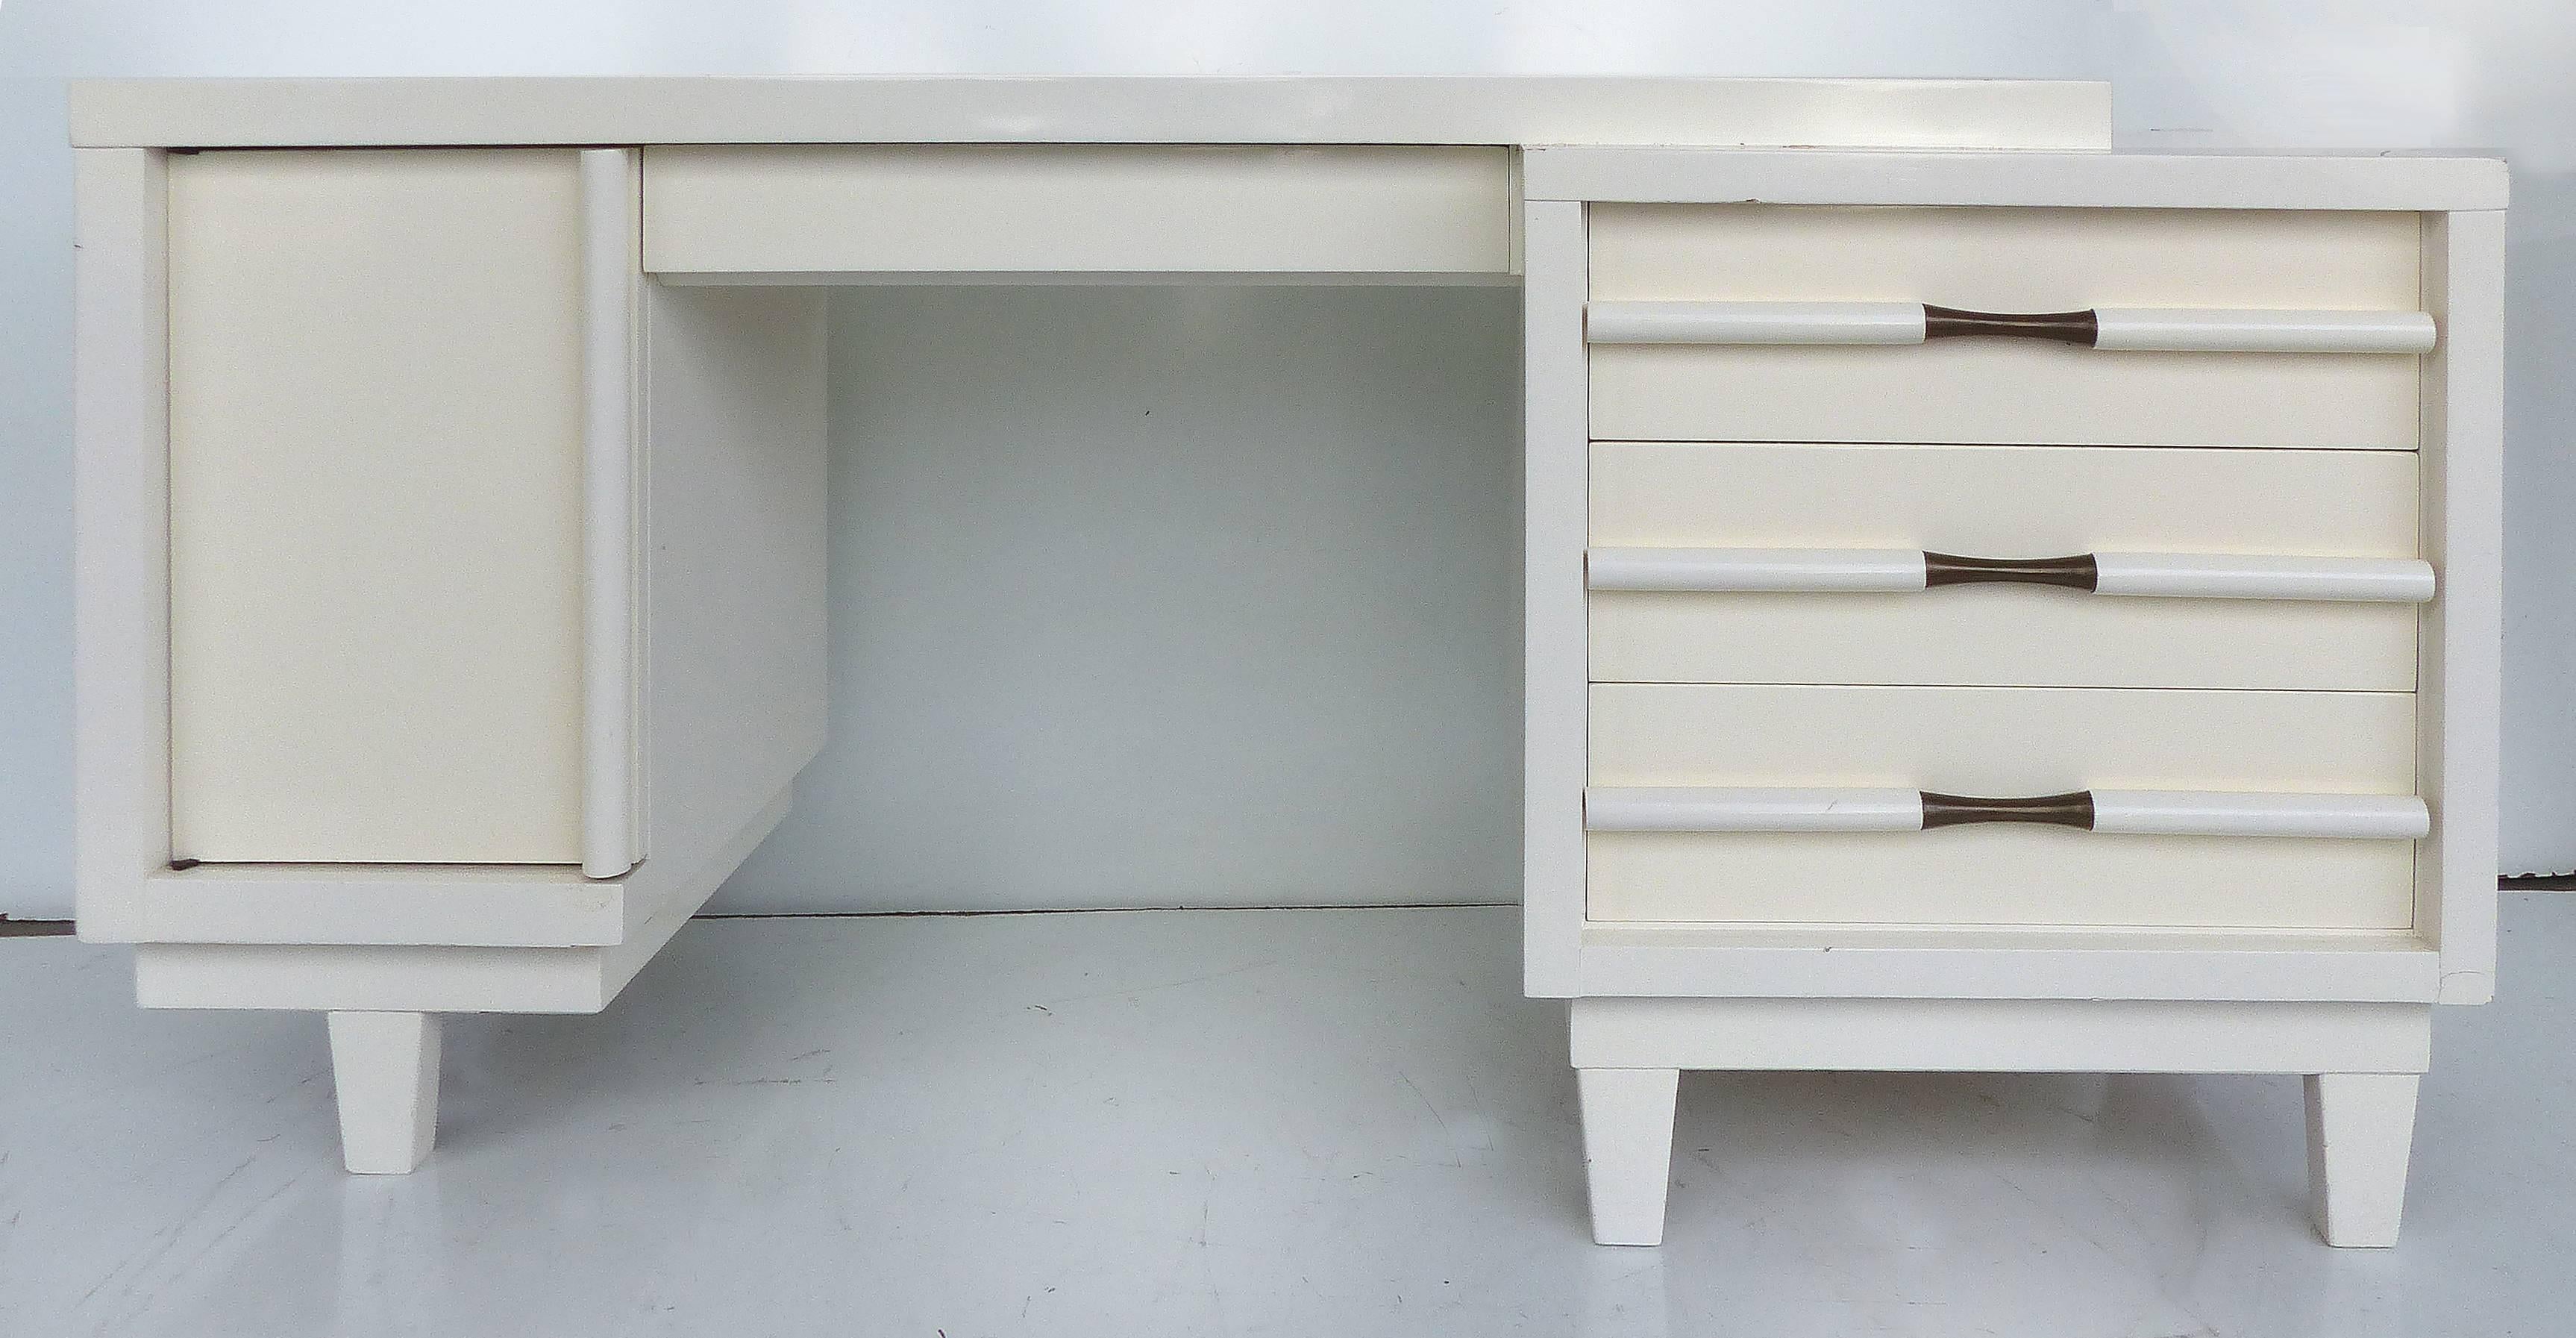 Offered for sale is a vintage Mid-Century Modern desk recently acquired from a multi-million dollar South Beach condo that was designed by a prominent South Florida designer. Unmarked but reminiscent of the designs of Paul Laszlo. Wonderful hardware